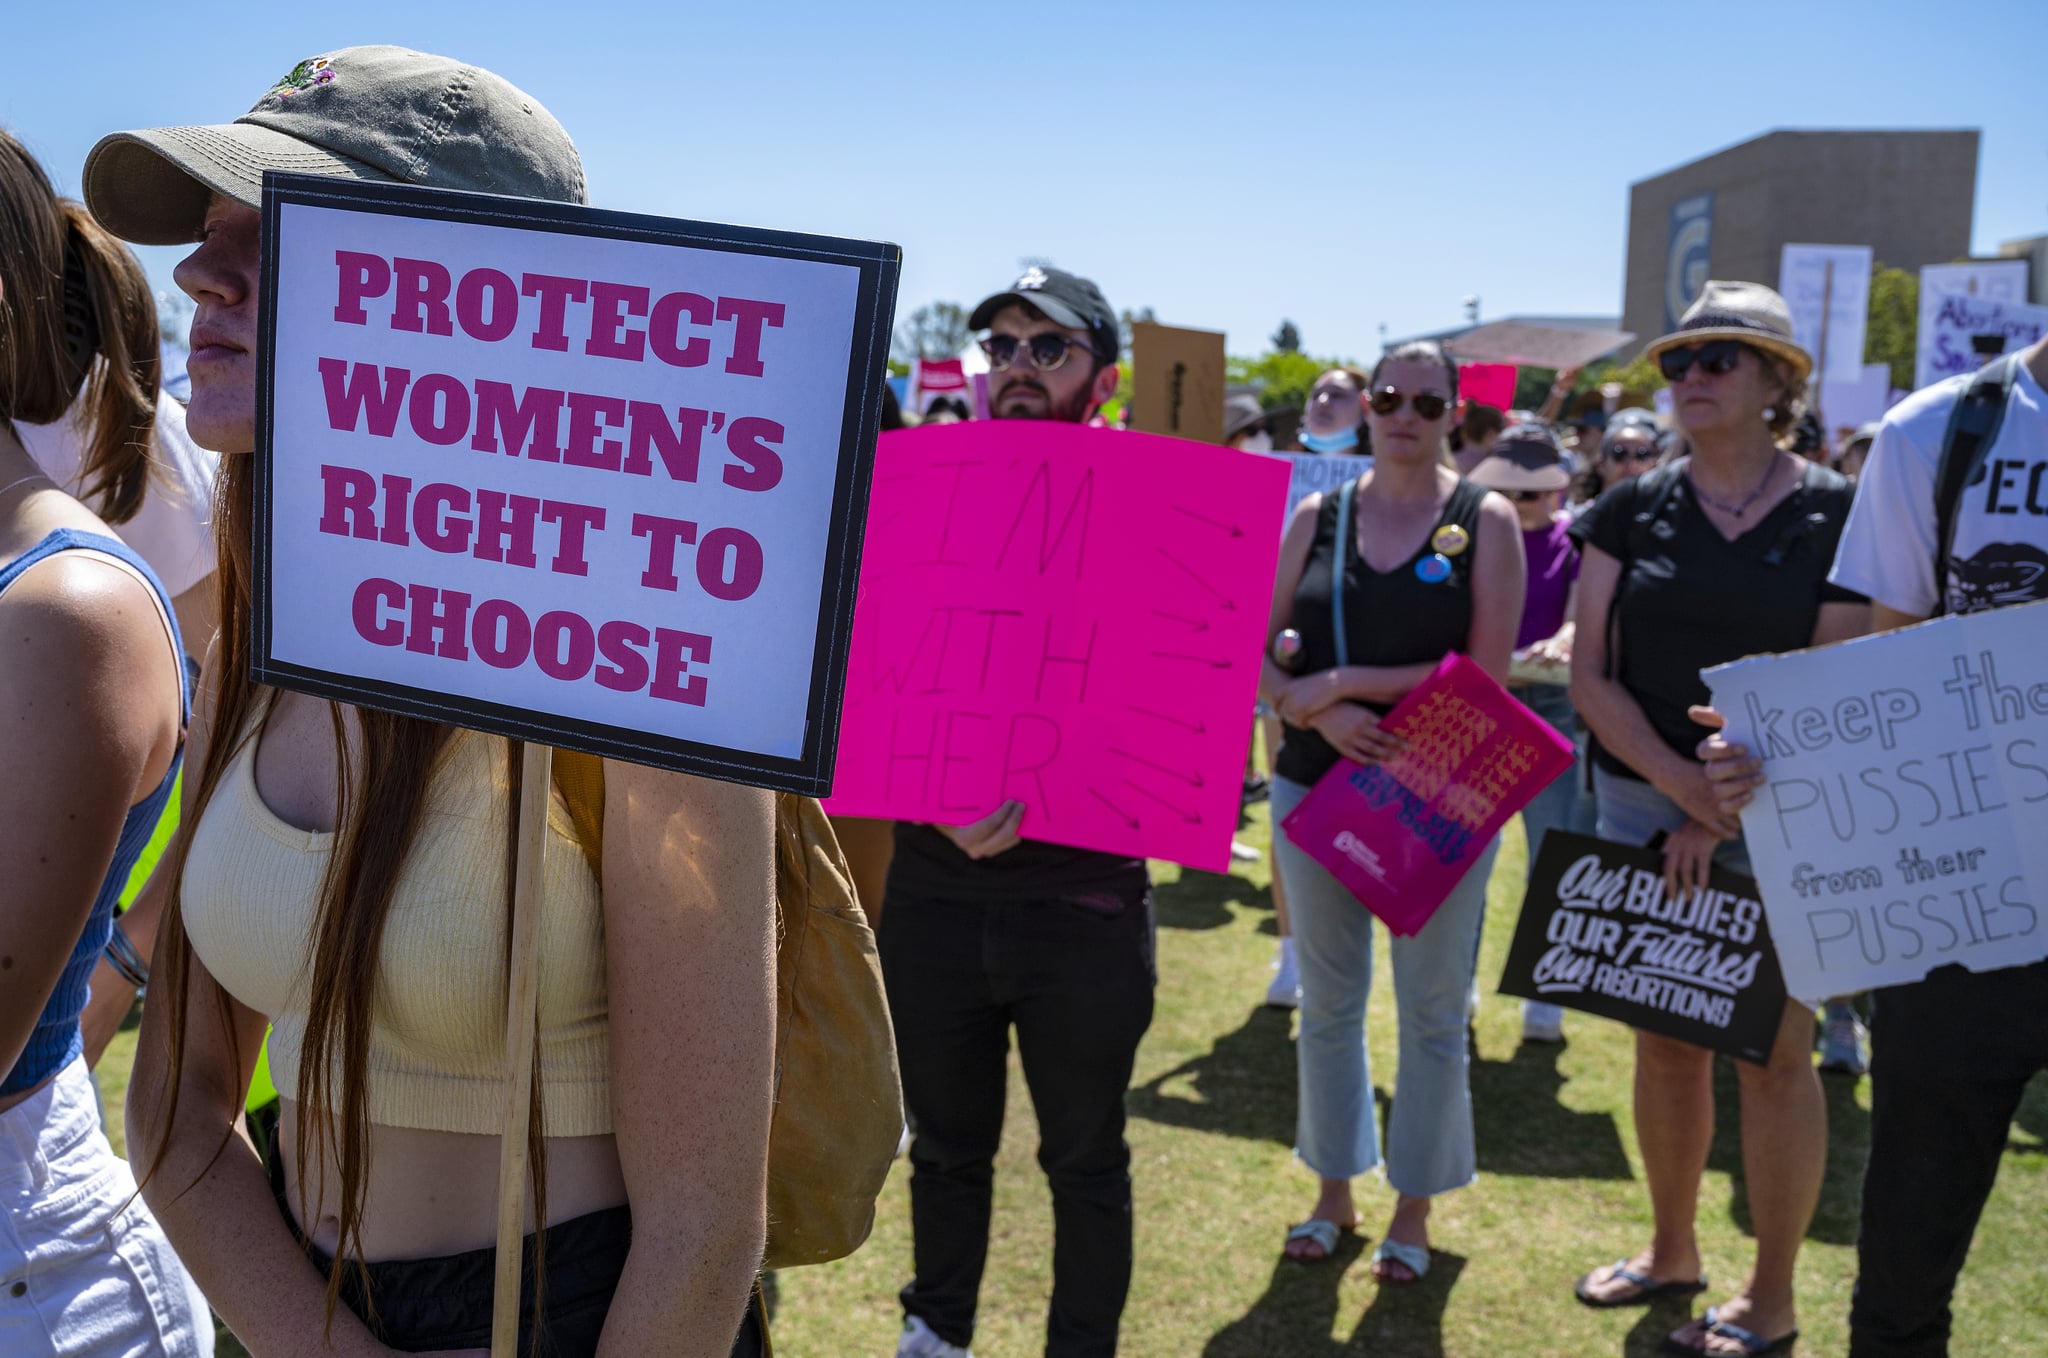 Santa Ana, CA - May 14: Many of the thousands of people attending the Bans Off Abortion rally carried signs for women's rights at Centennial Park in Santa Ana on Saturday, May 14, 2022. (Photo by Mark Rightmire/MediaNews Group/Orange County Register via Getty Images)